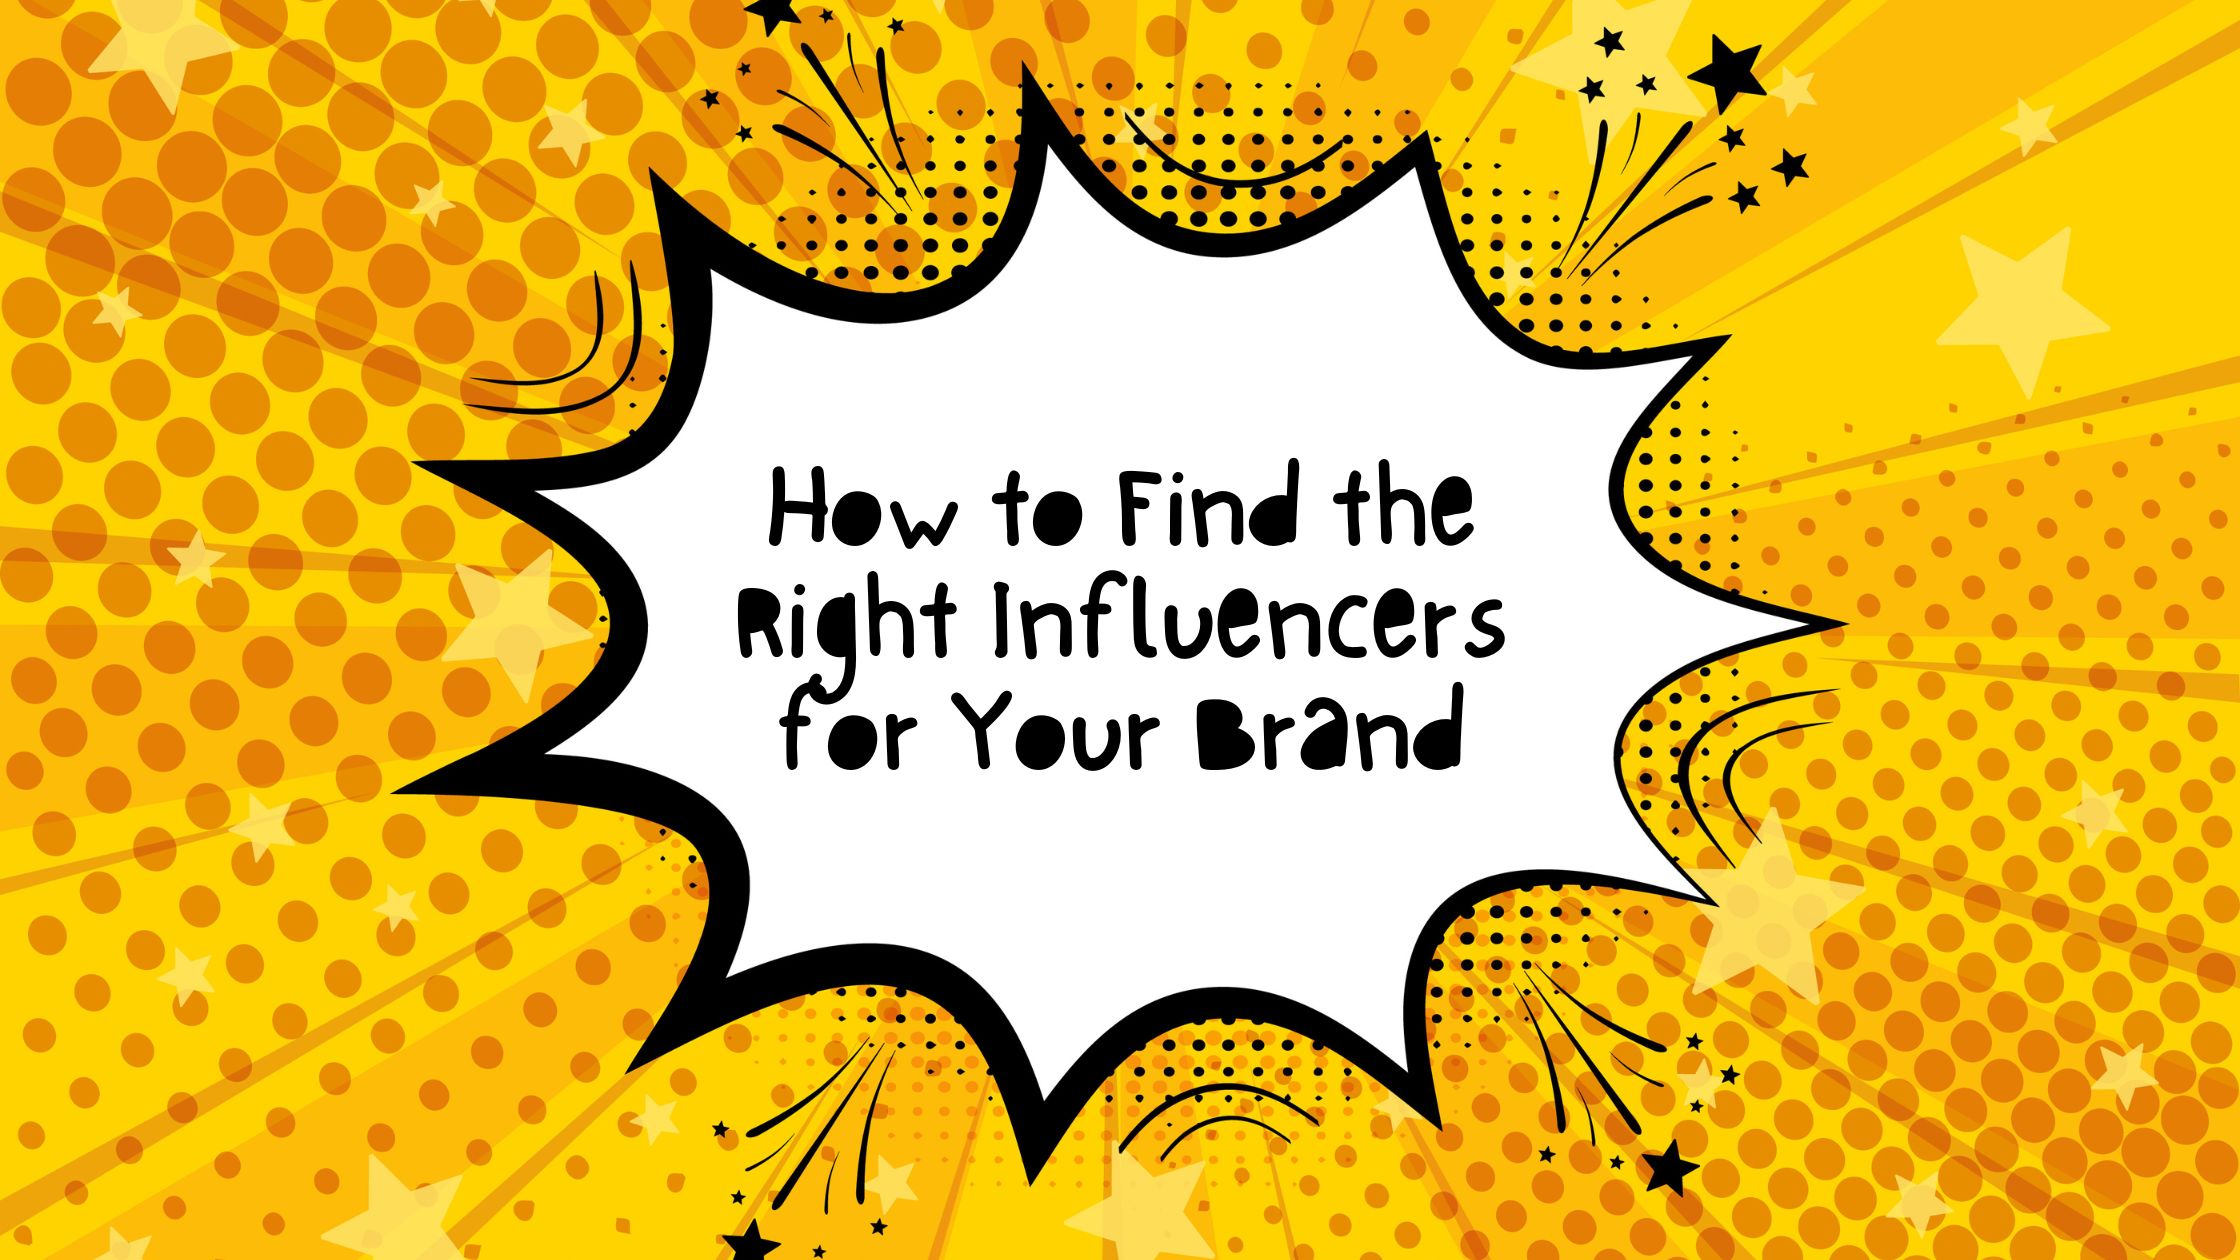 How to find the right influencers for your brand